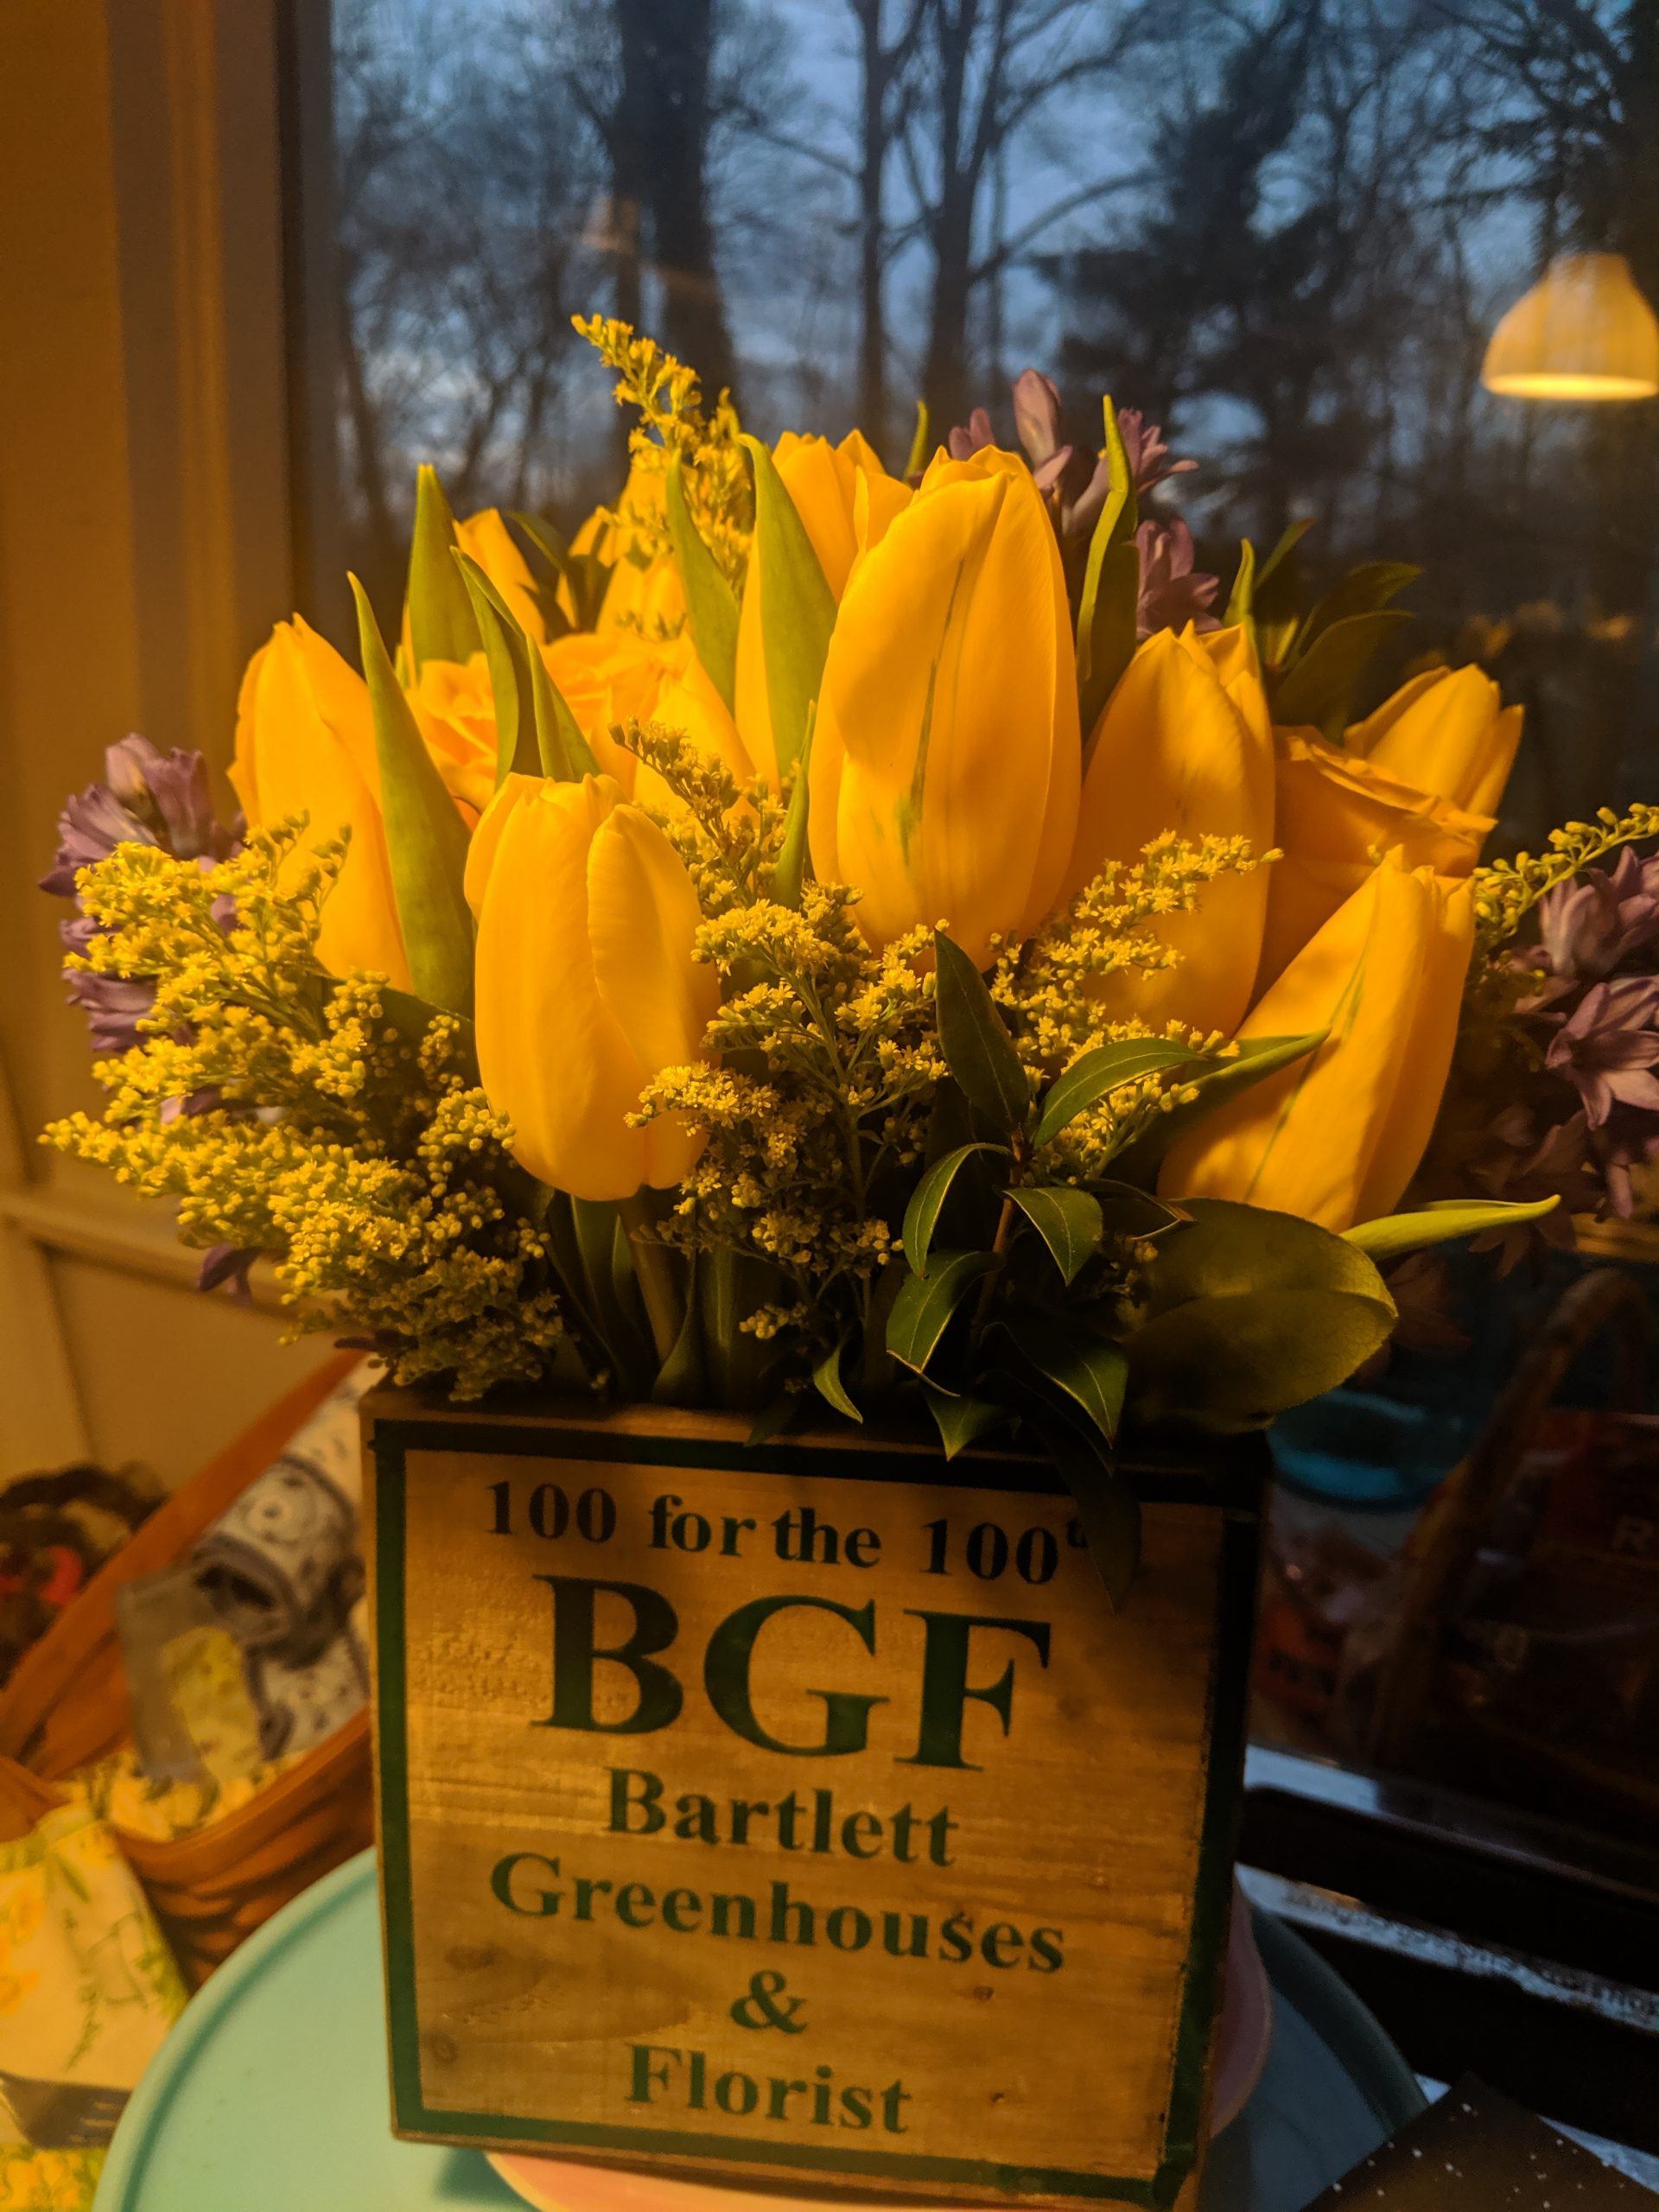 Sweet smelling thank you goes to 100 for florist’s centennial